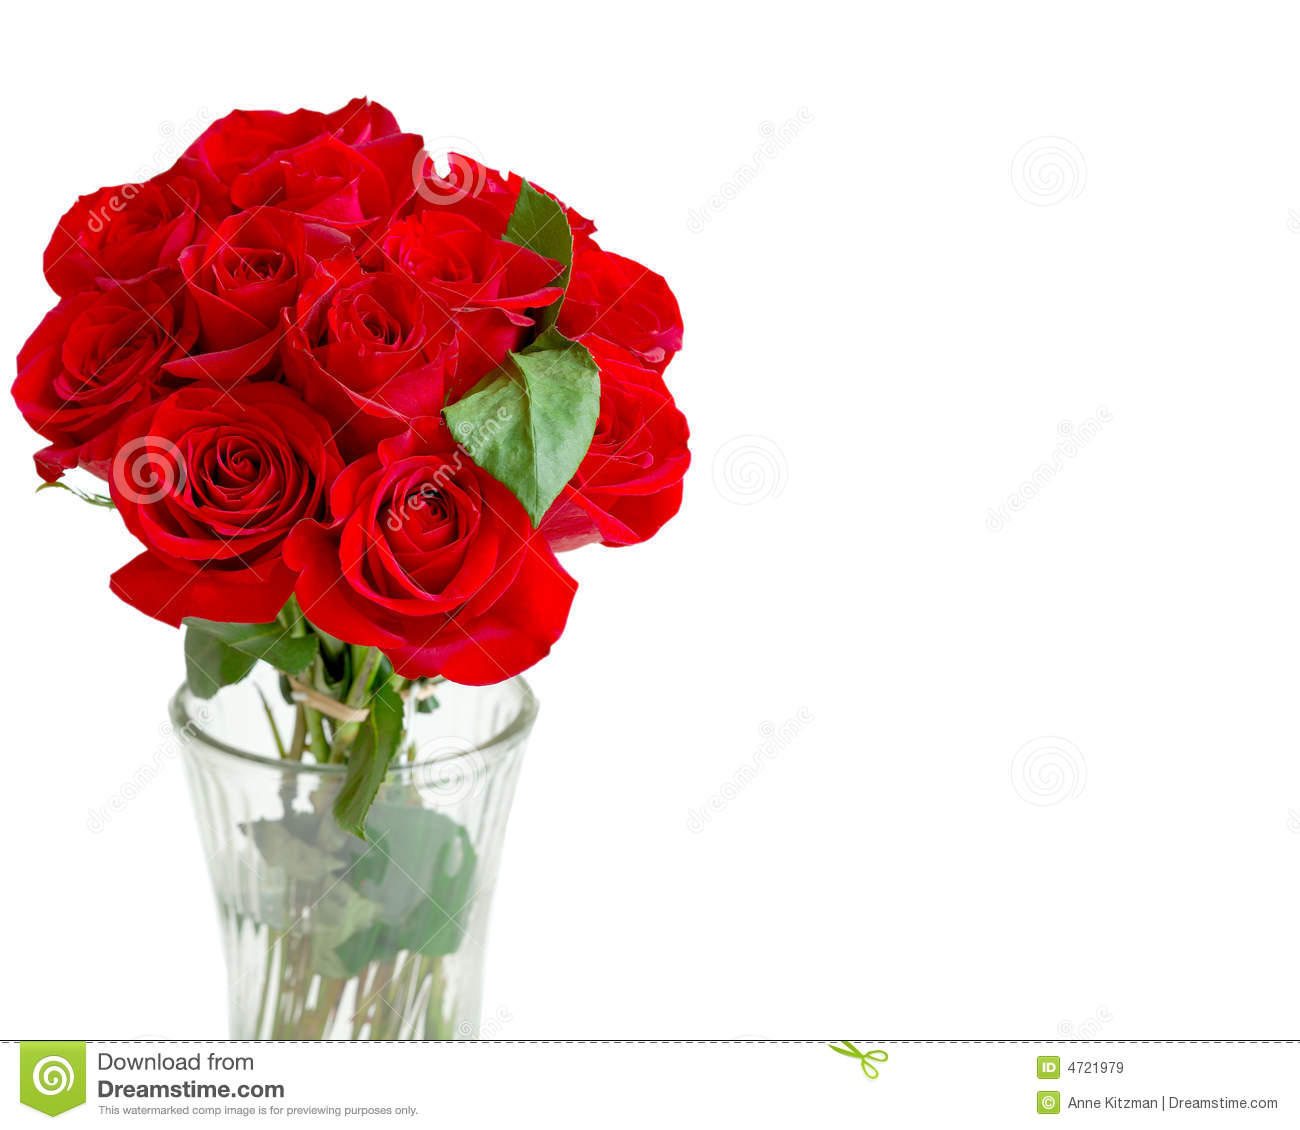 One Dozen Red Roses   A Beautiful Bouquet Of Bright Red Perfect Long